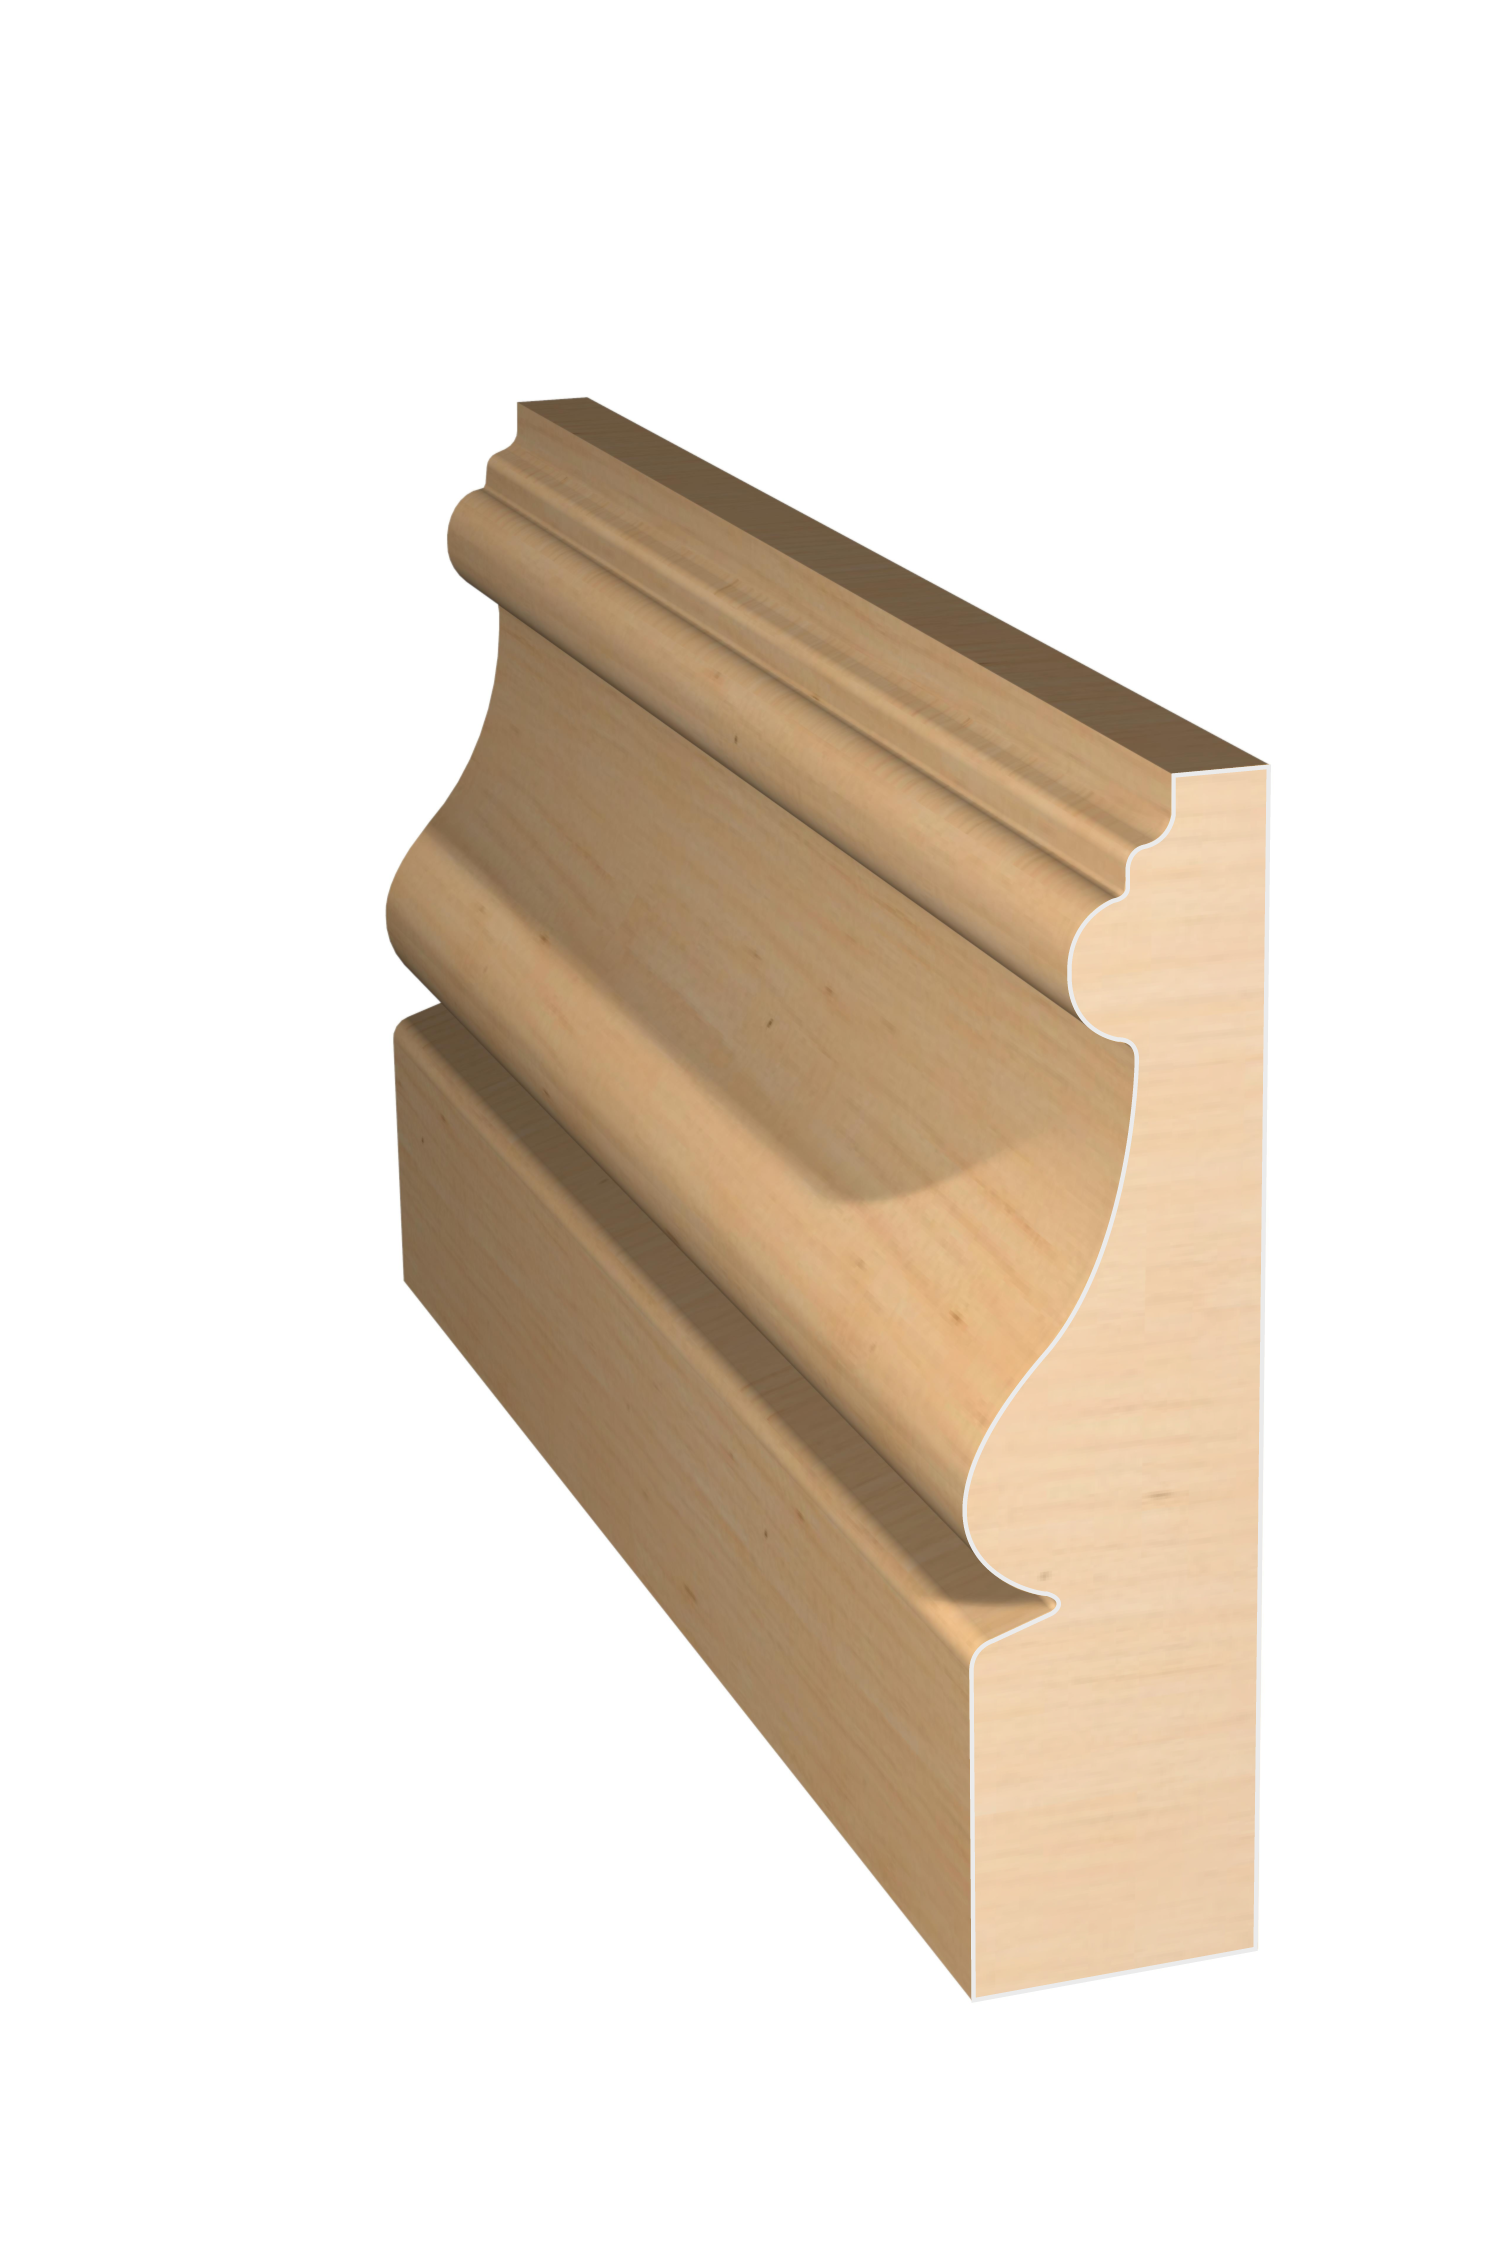 Three dimensional rendering of custom casing wood molding CAPL31414 made by Public Lumber Company in Detroit.